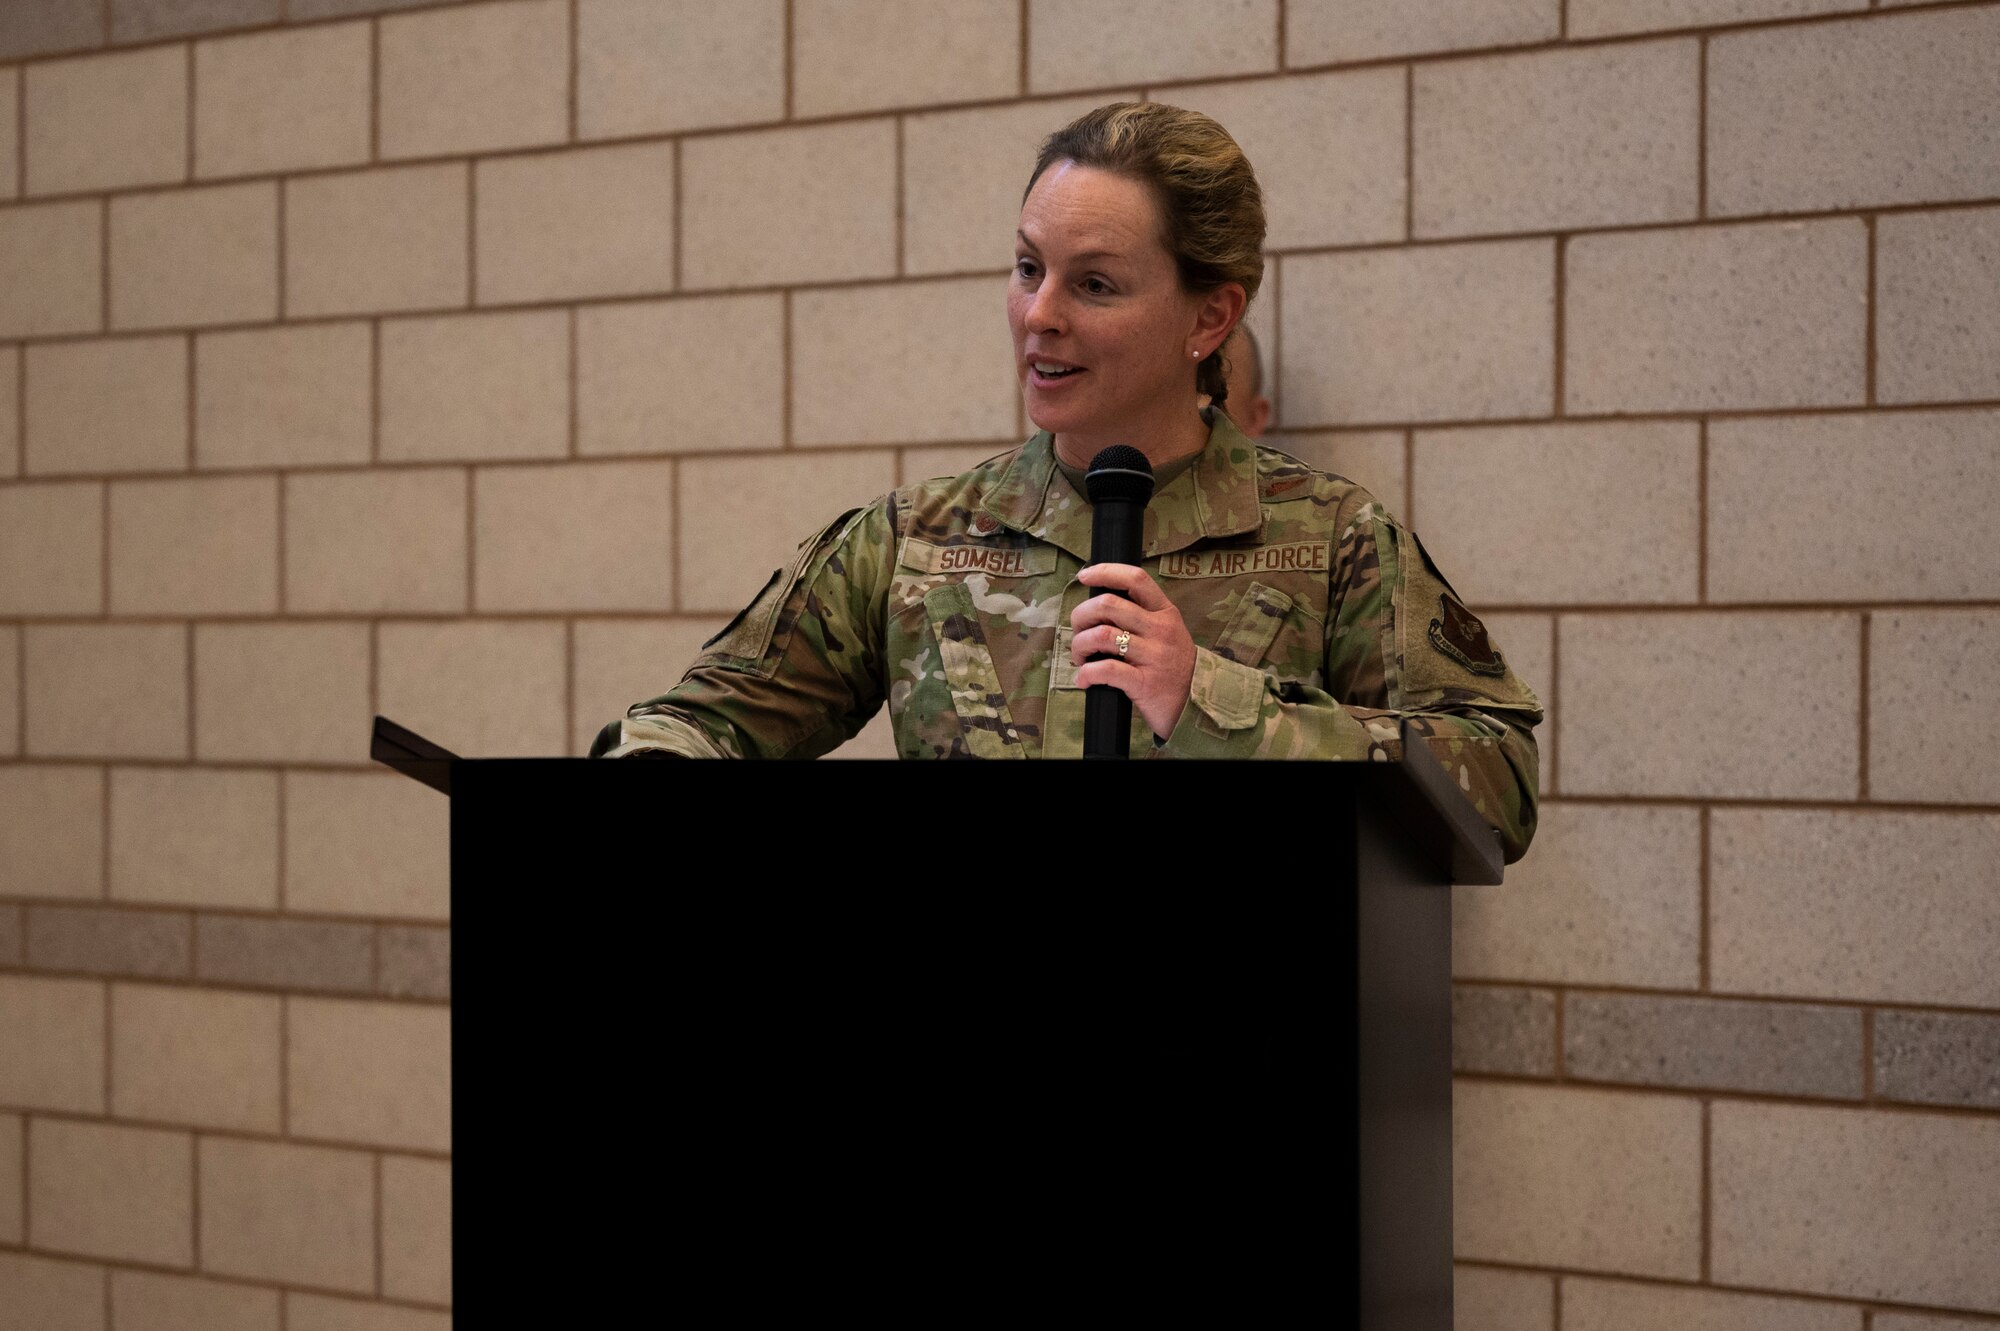 Col. Elizabeth Somsel, 7th Medical Group commander, gives her remarks during the 7th Medical Support Squadron Inactivation Ceremony at Dyess Air Force Base, Texas, June 24, 2022. The 7th MDSS functions will transfer to the 7th Healthcare Operations Squadron and the flight’s mission will not change. (U.S. Air Force photo by Senior Airman Reilly McGuire)